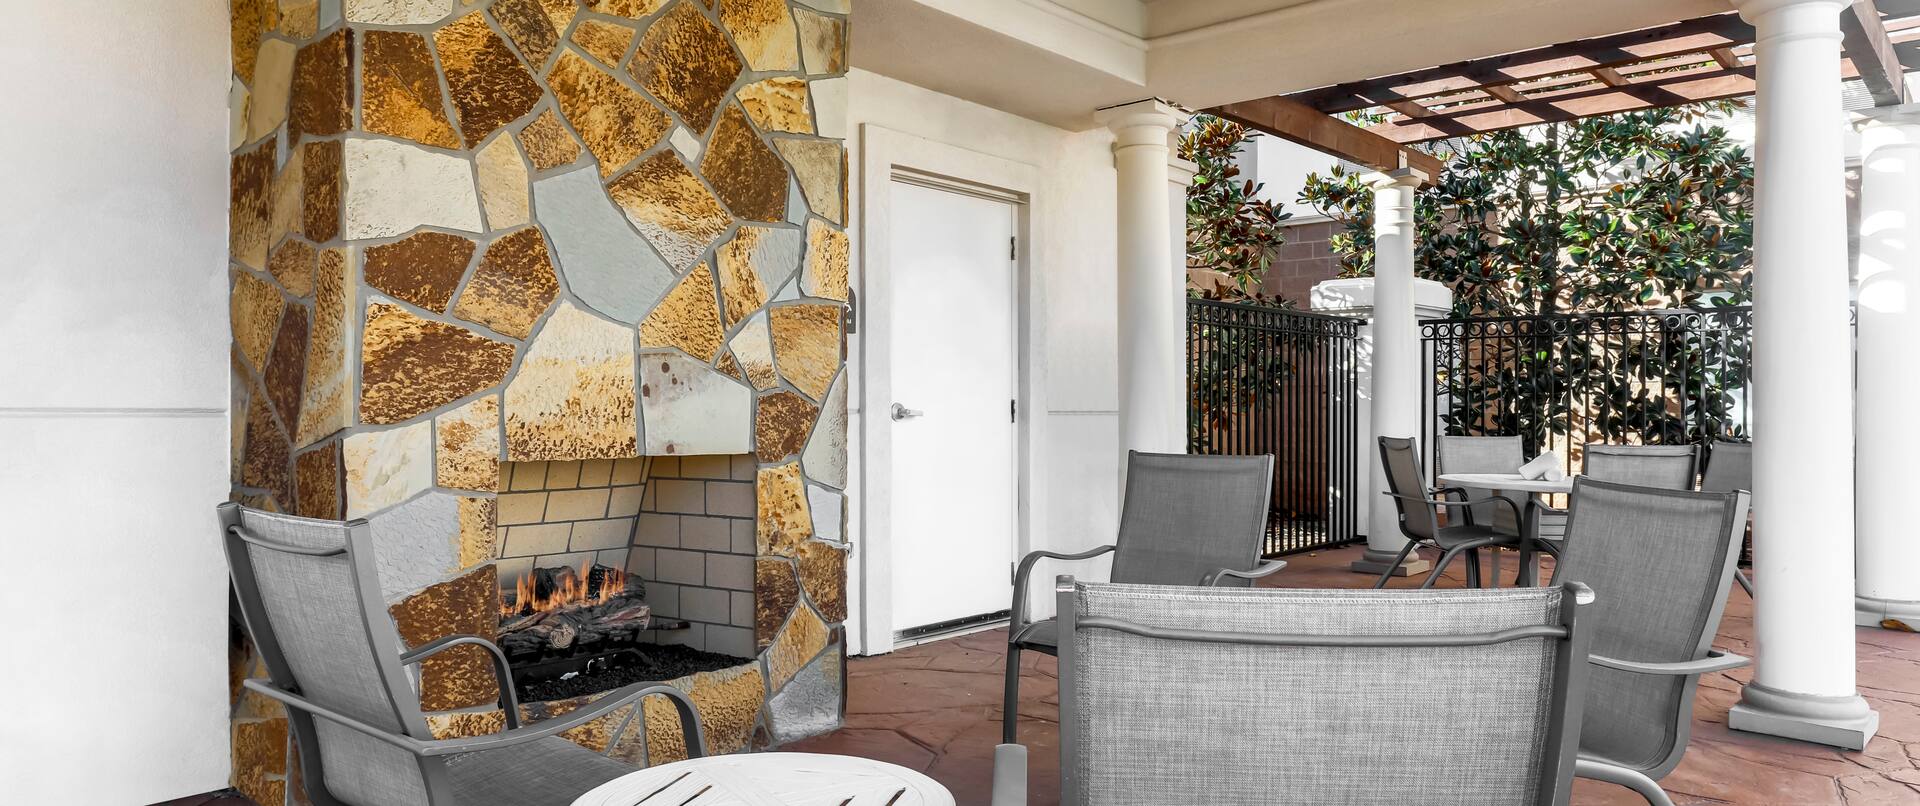 Outdoor Patio Area with fire and seating